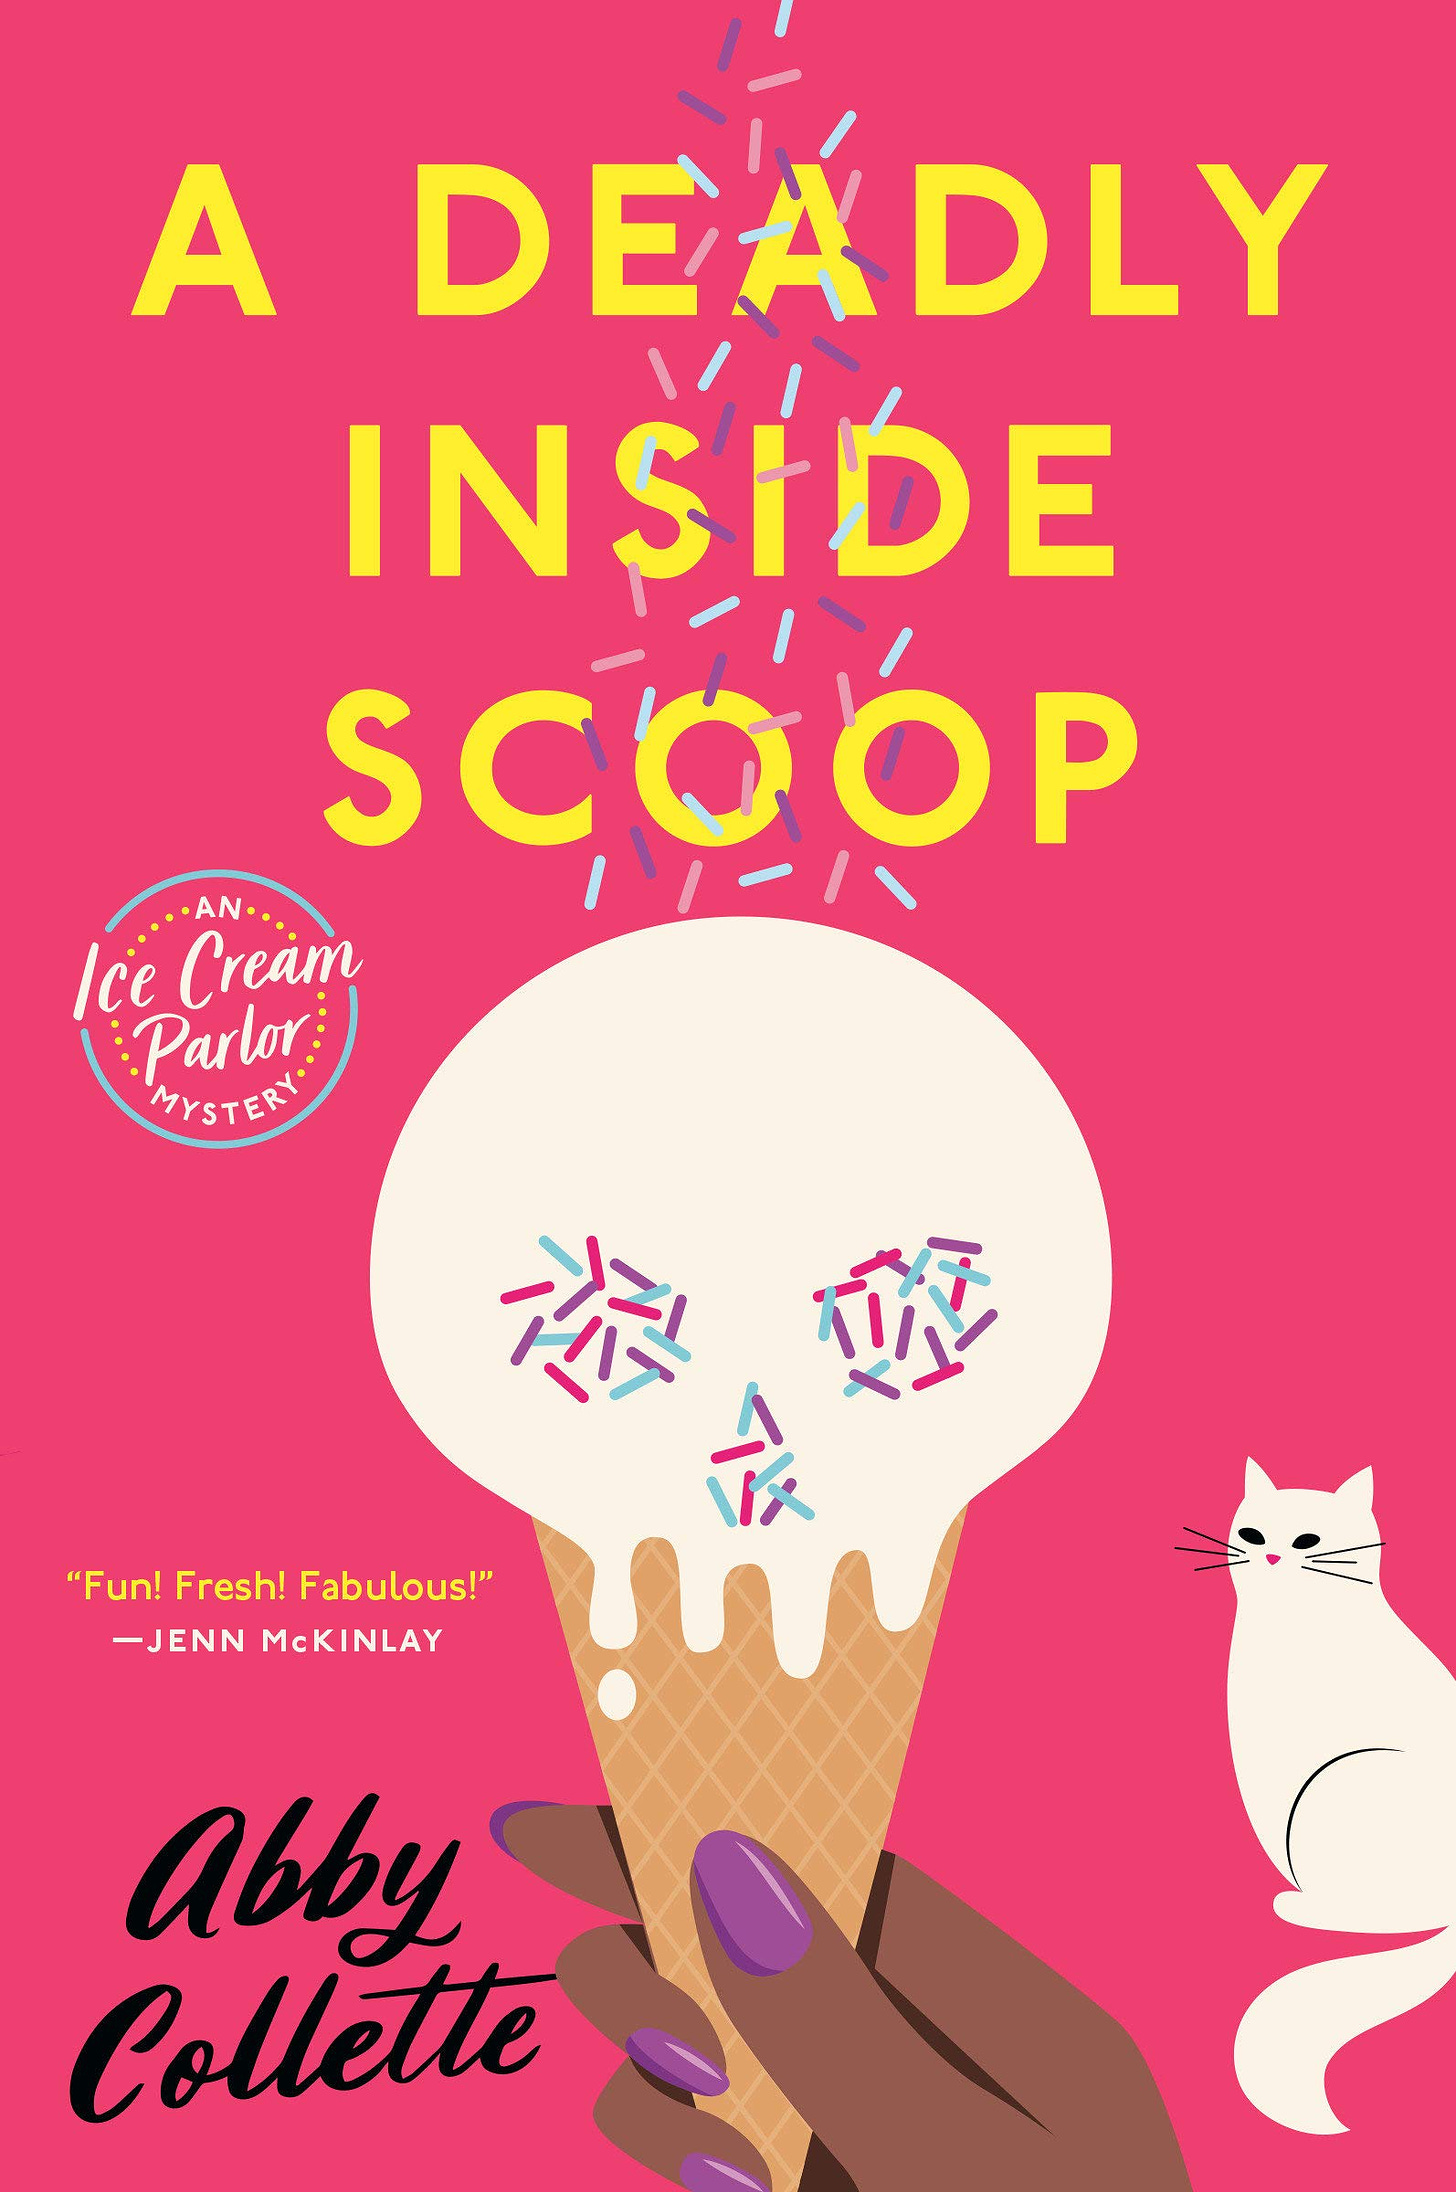 Amazon.com: A Deadly Inside Scoop (An Ice Cream Parlor Mystery):  9780593099667: Collette, Abby: Books